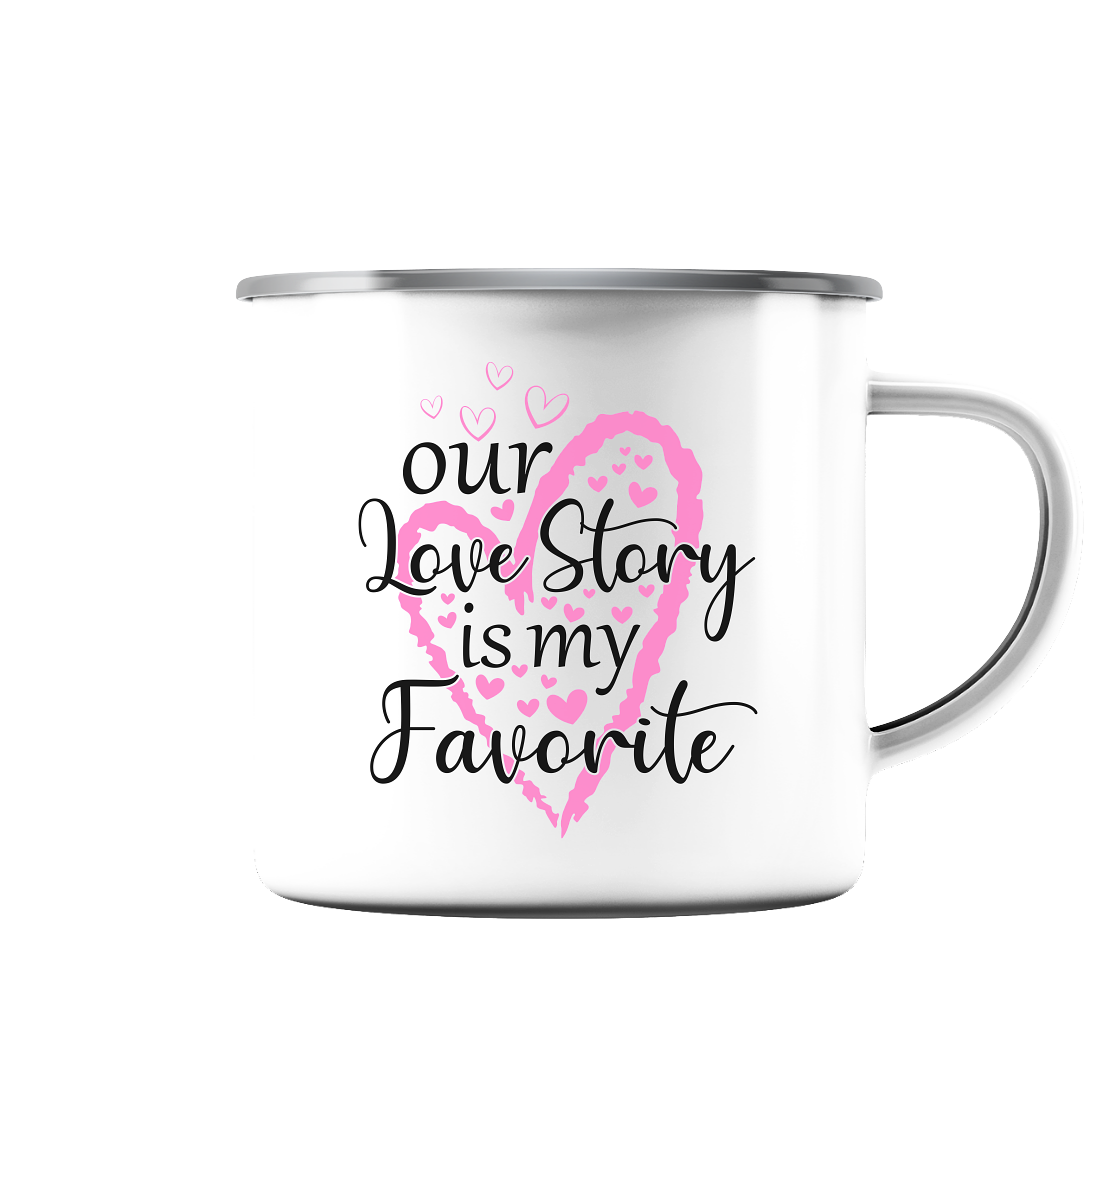 Our love story is my Favourite - Emaille Tasse